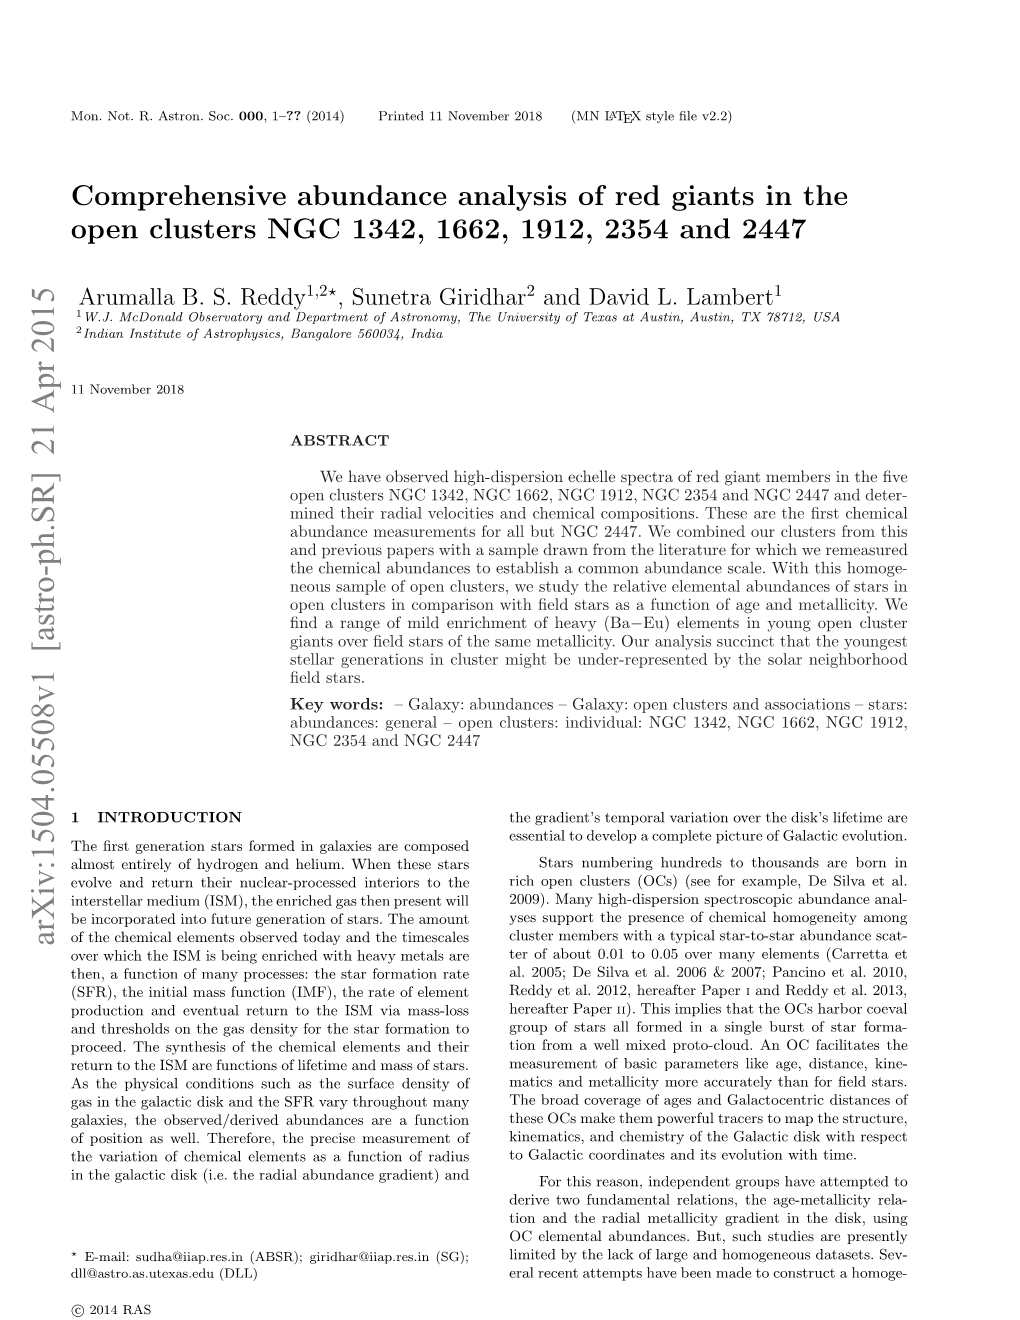 Comprehensive Abundance Analysis of Red Giants in the Open Clusters